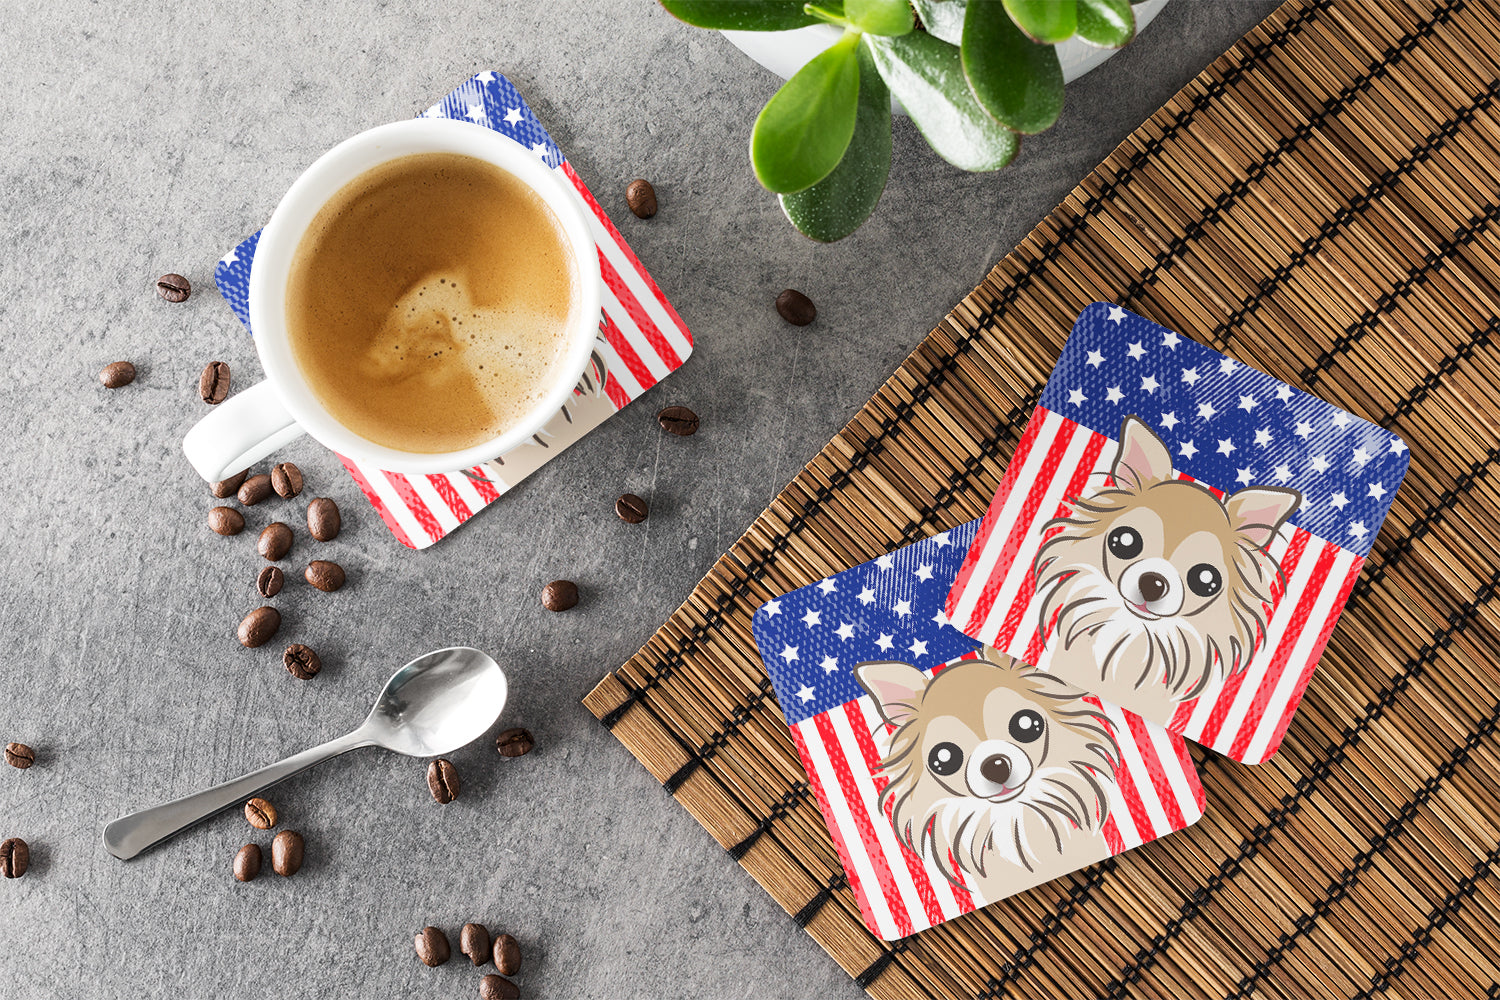 American Flag and Chihuahua Foam Coaster Set of 4 - the-store.com